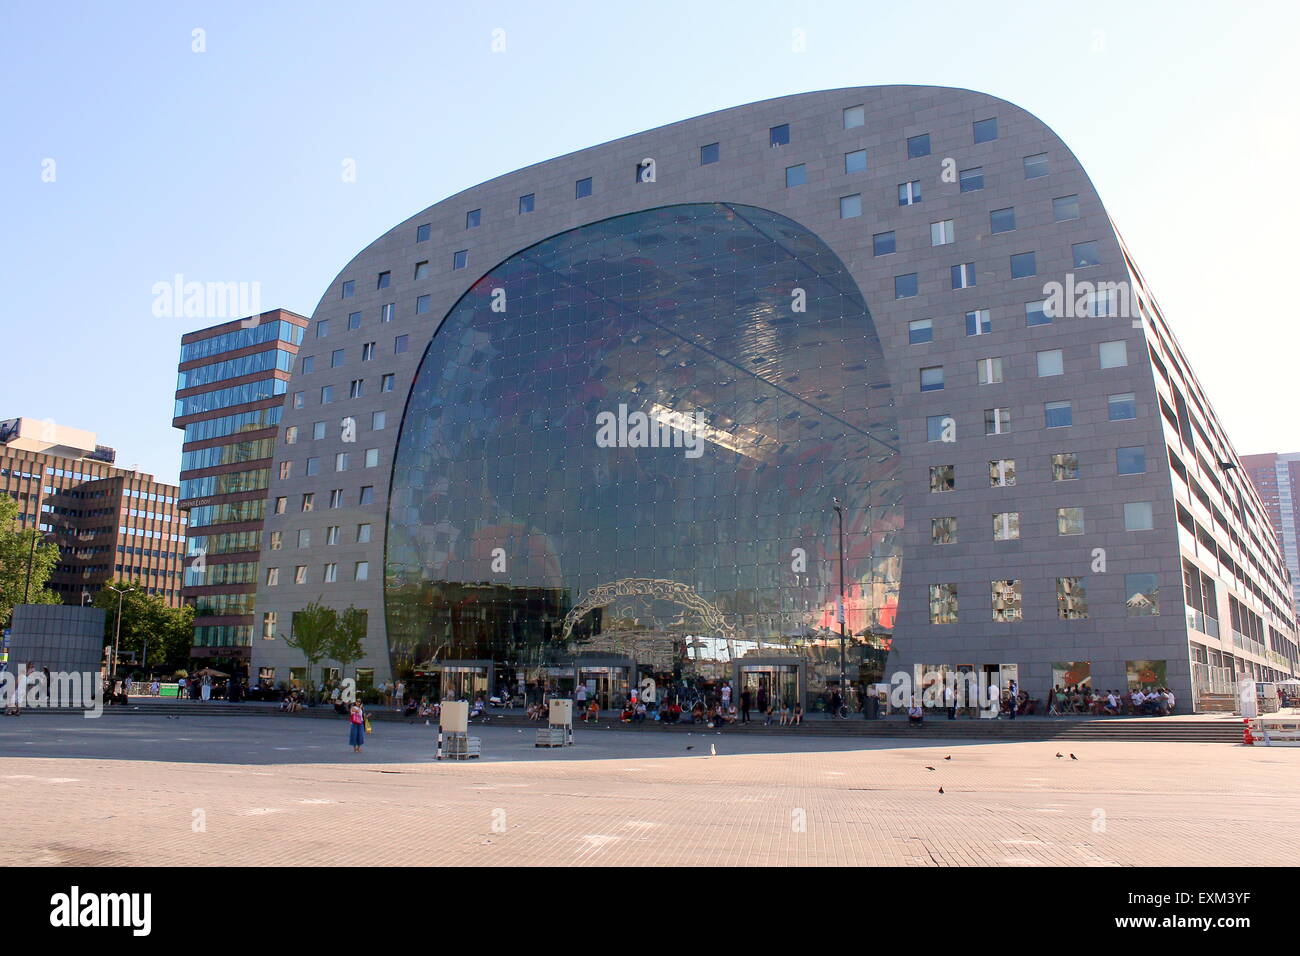 Exterior of the Rotterdamse Markthal (Rotterdam Market hall), at Blaak square. Designed by MVRDV architects, finished in 2014. Stock Photo